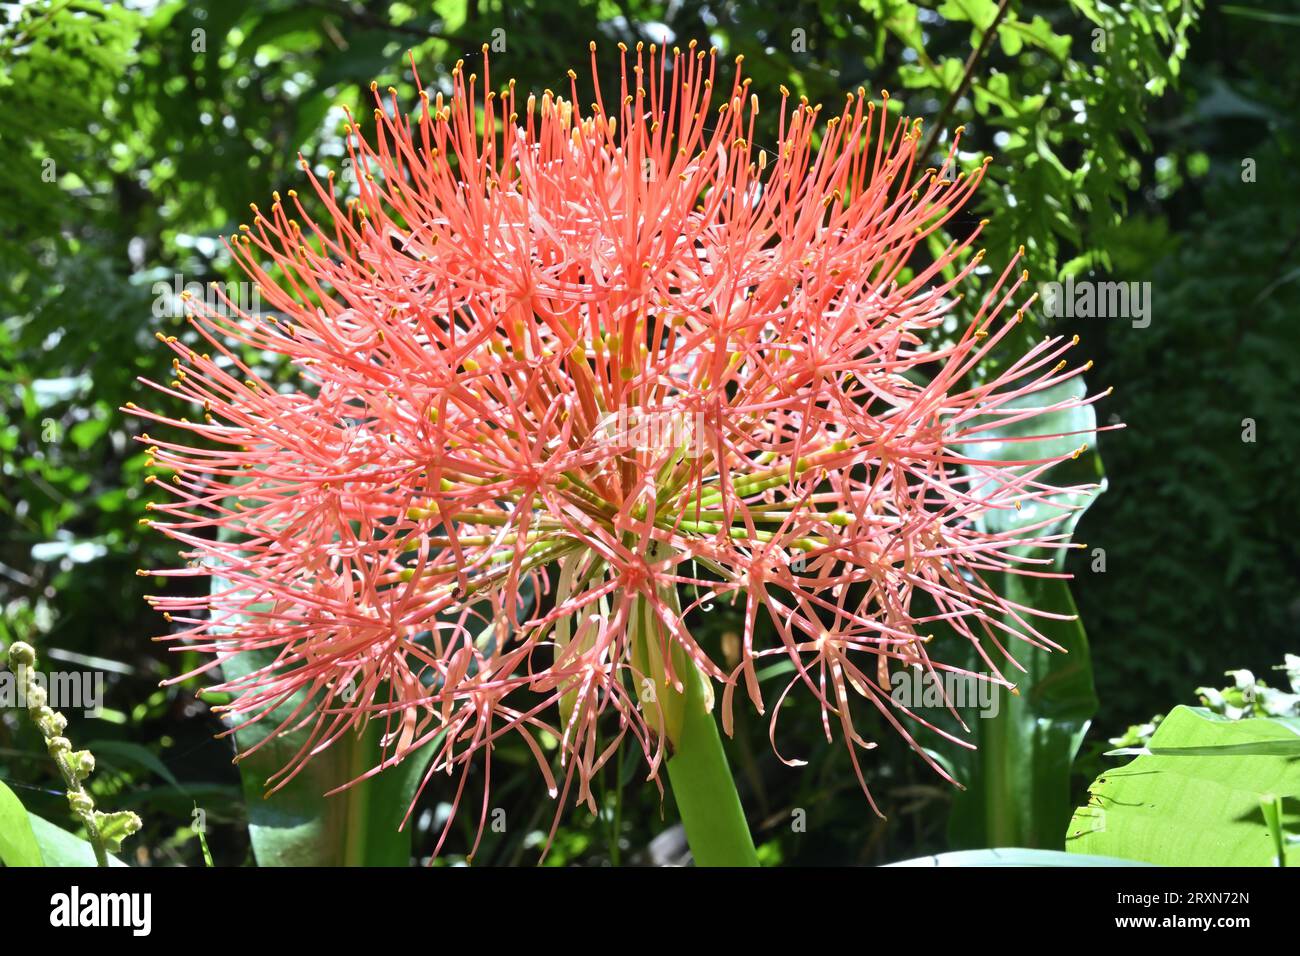 Closeup side view of a globe shaped red flower inflorescence known as the Fireball lily (Scadoxus Multiflorus) bloom in the garden Stock Photo